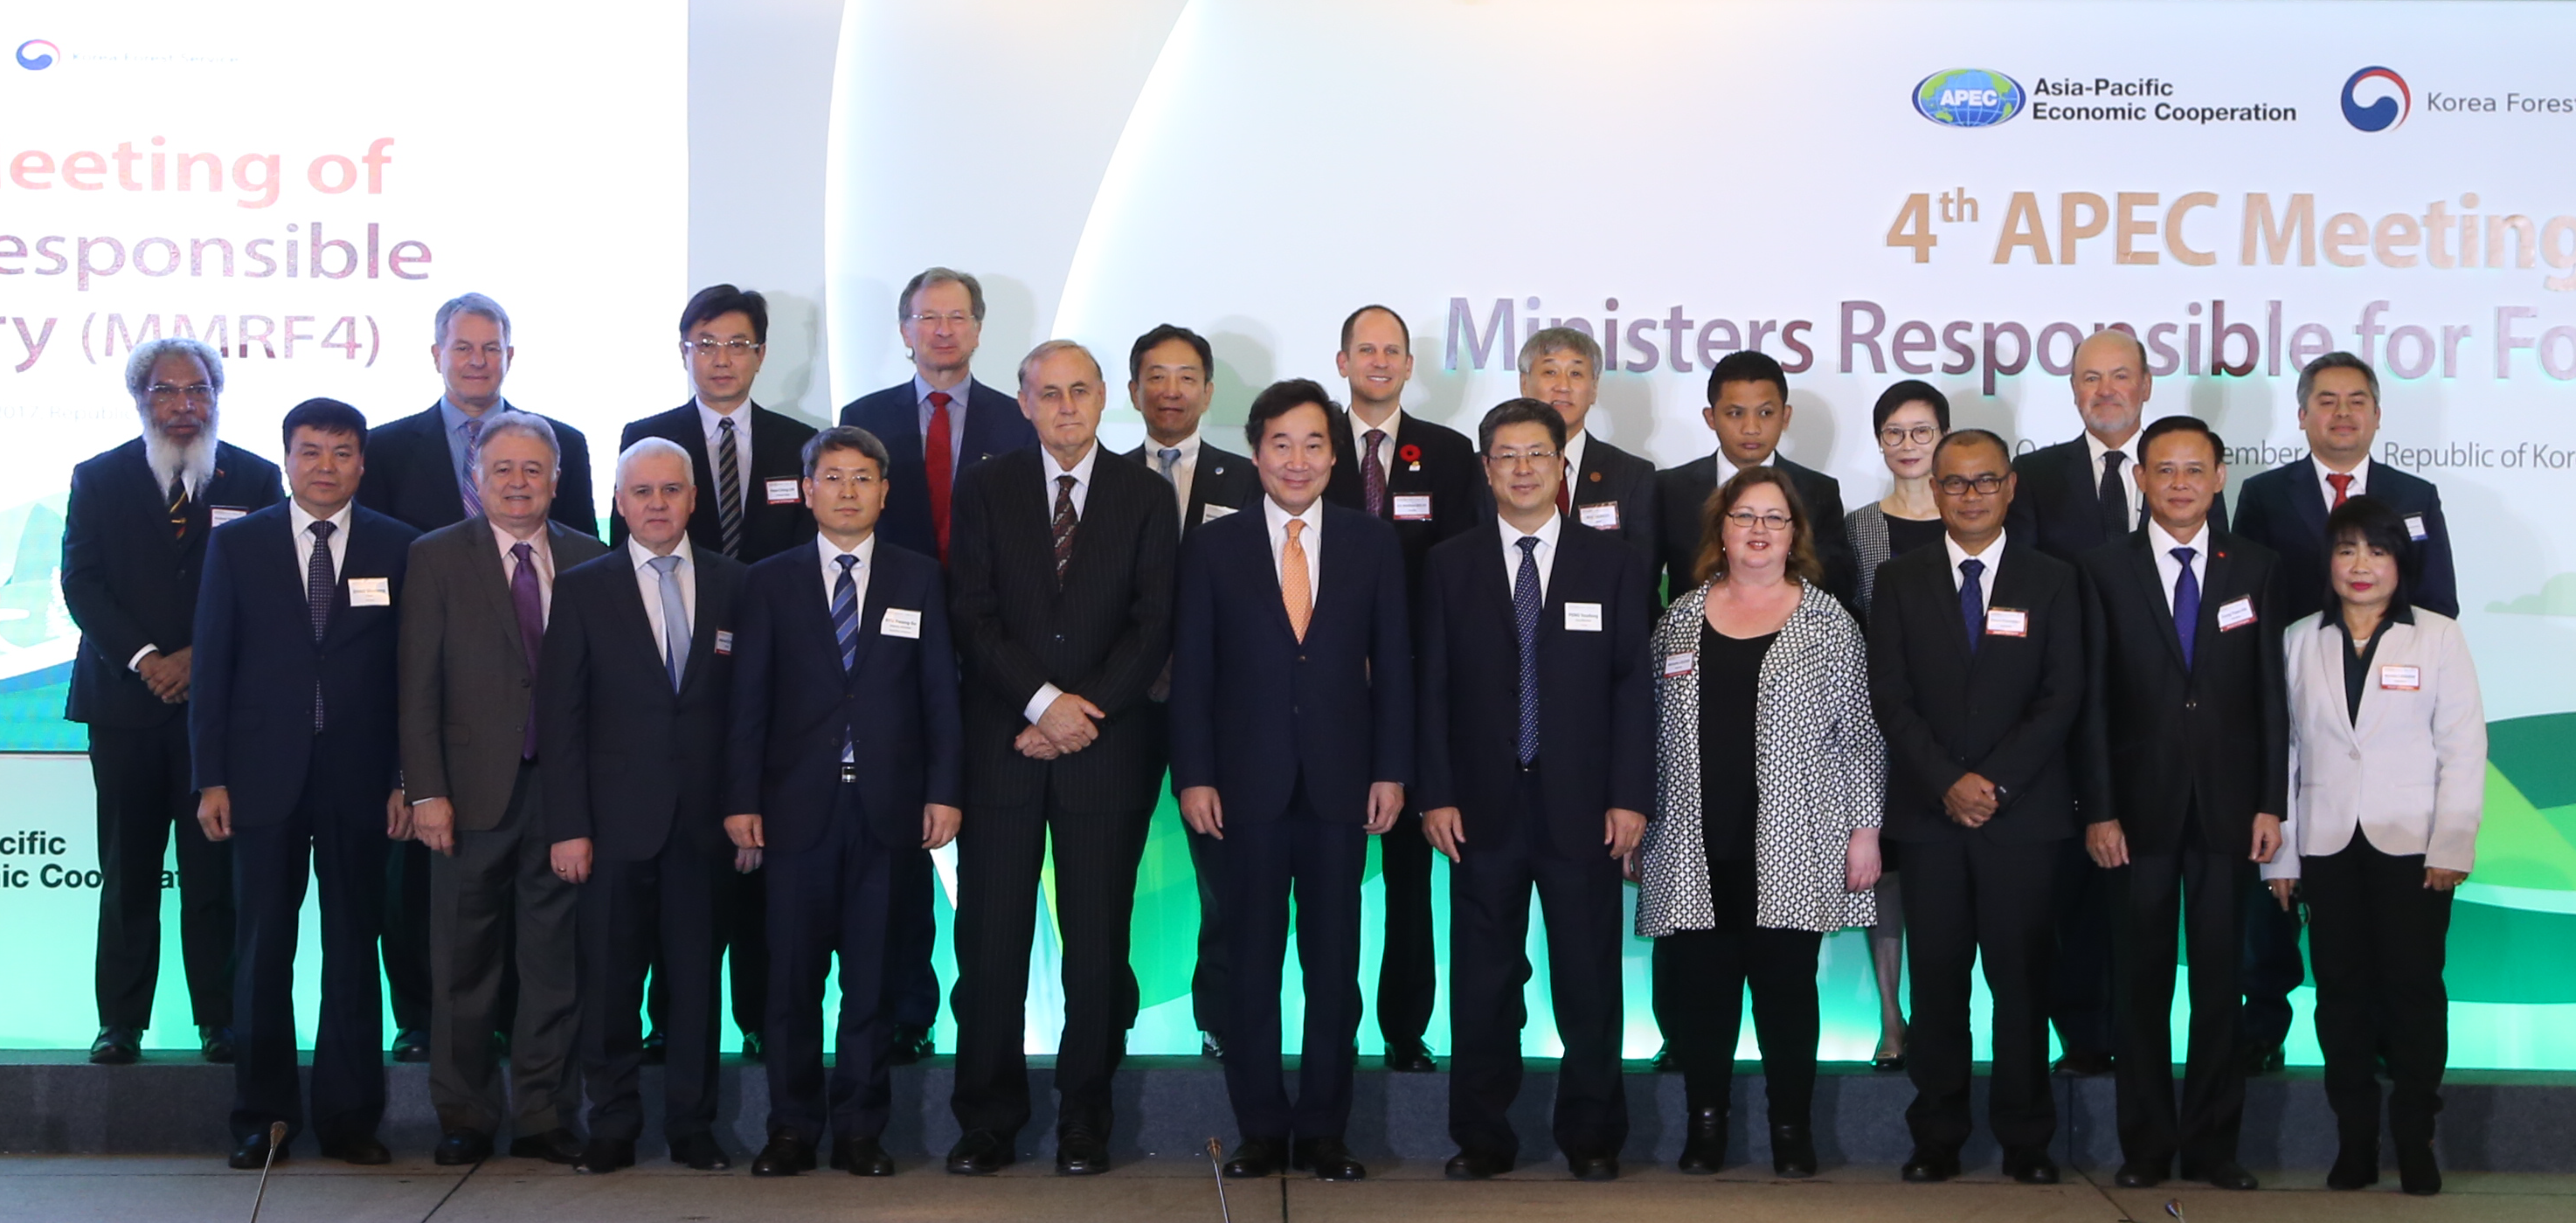 APEC Meeting of Ministers Responsible for Forestry